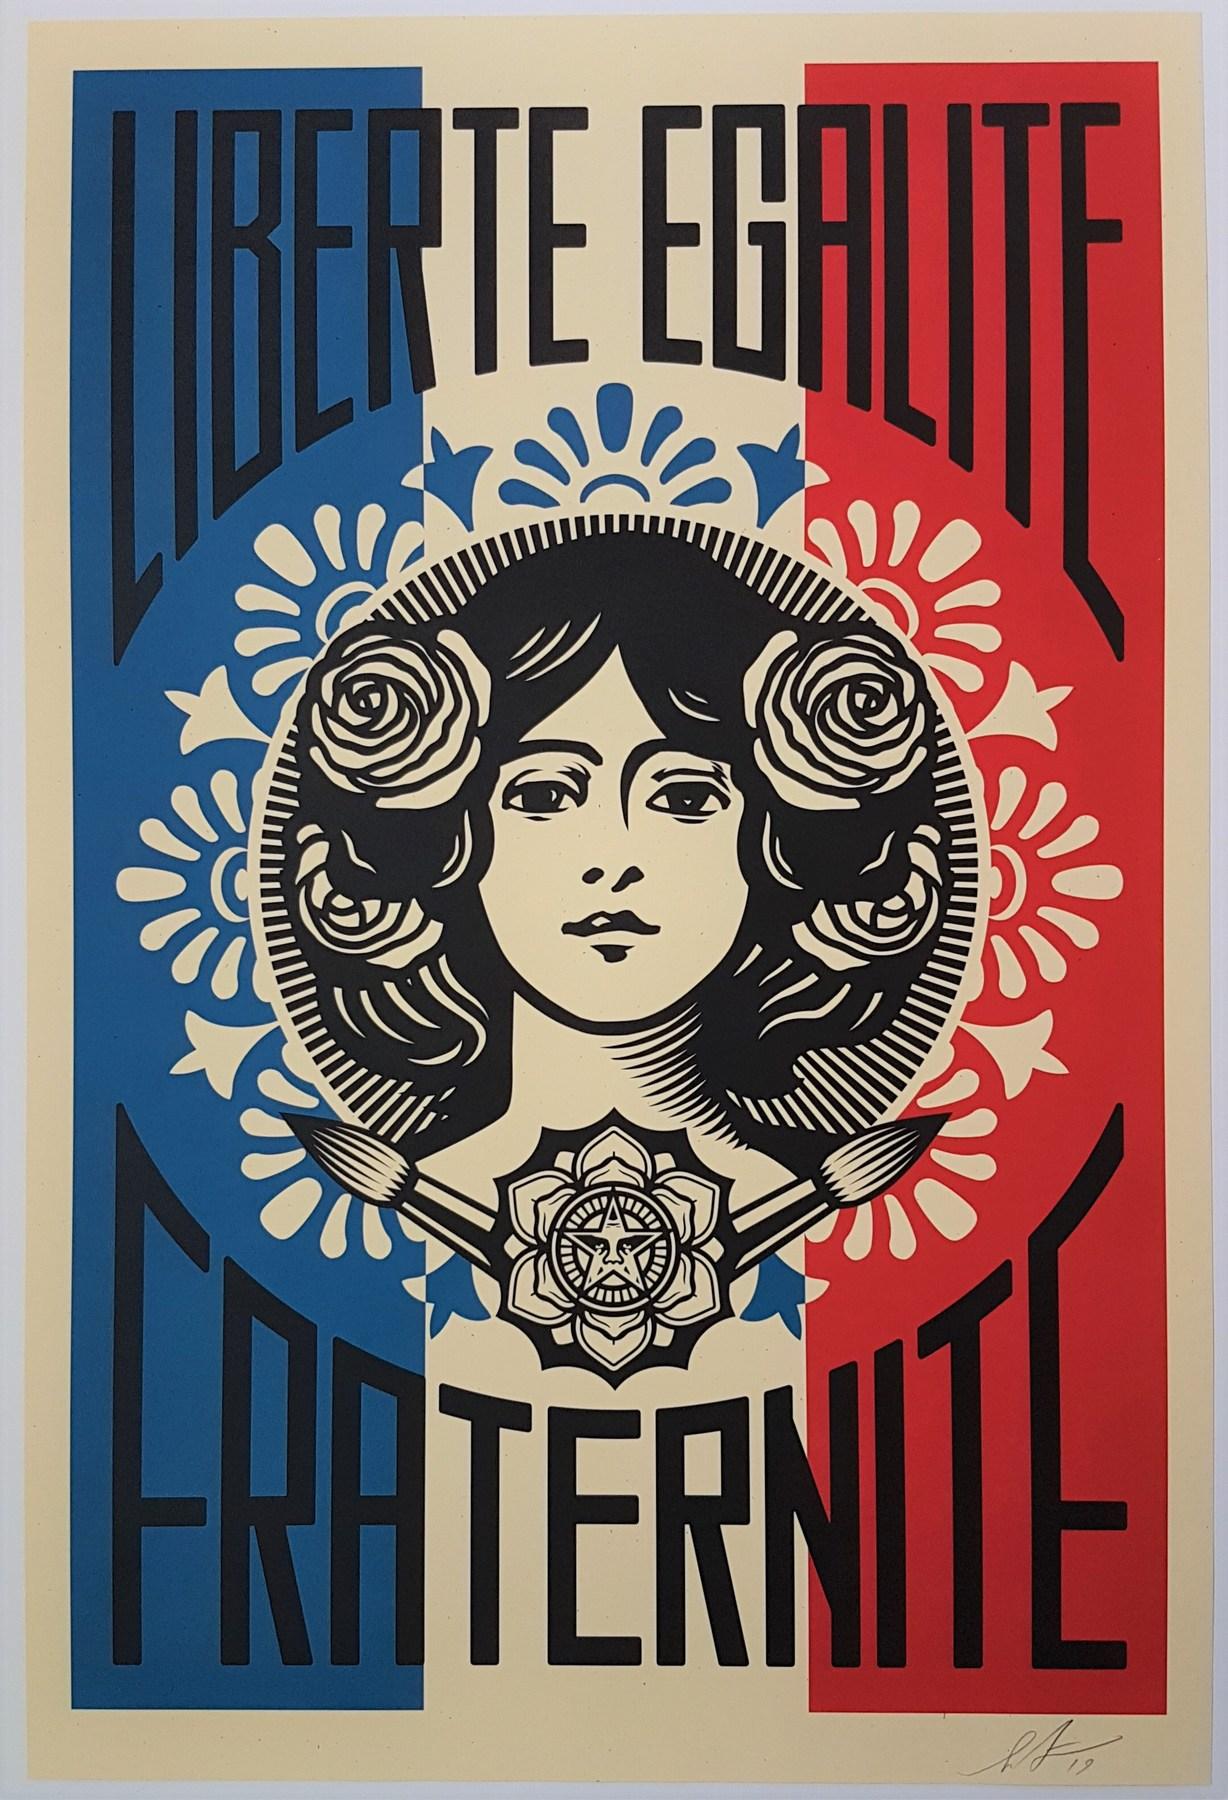 Liberte Egalite Fraternite ($35 SHIPPING U.S. Only (not $499!) - Print by Shepard Fairey